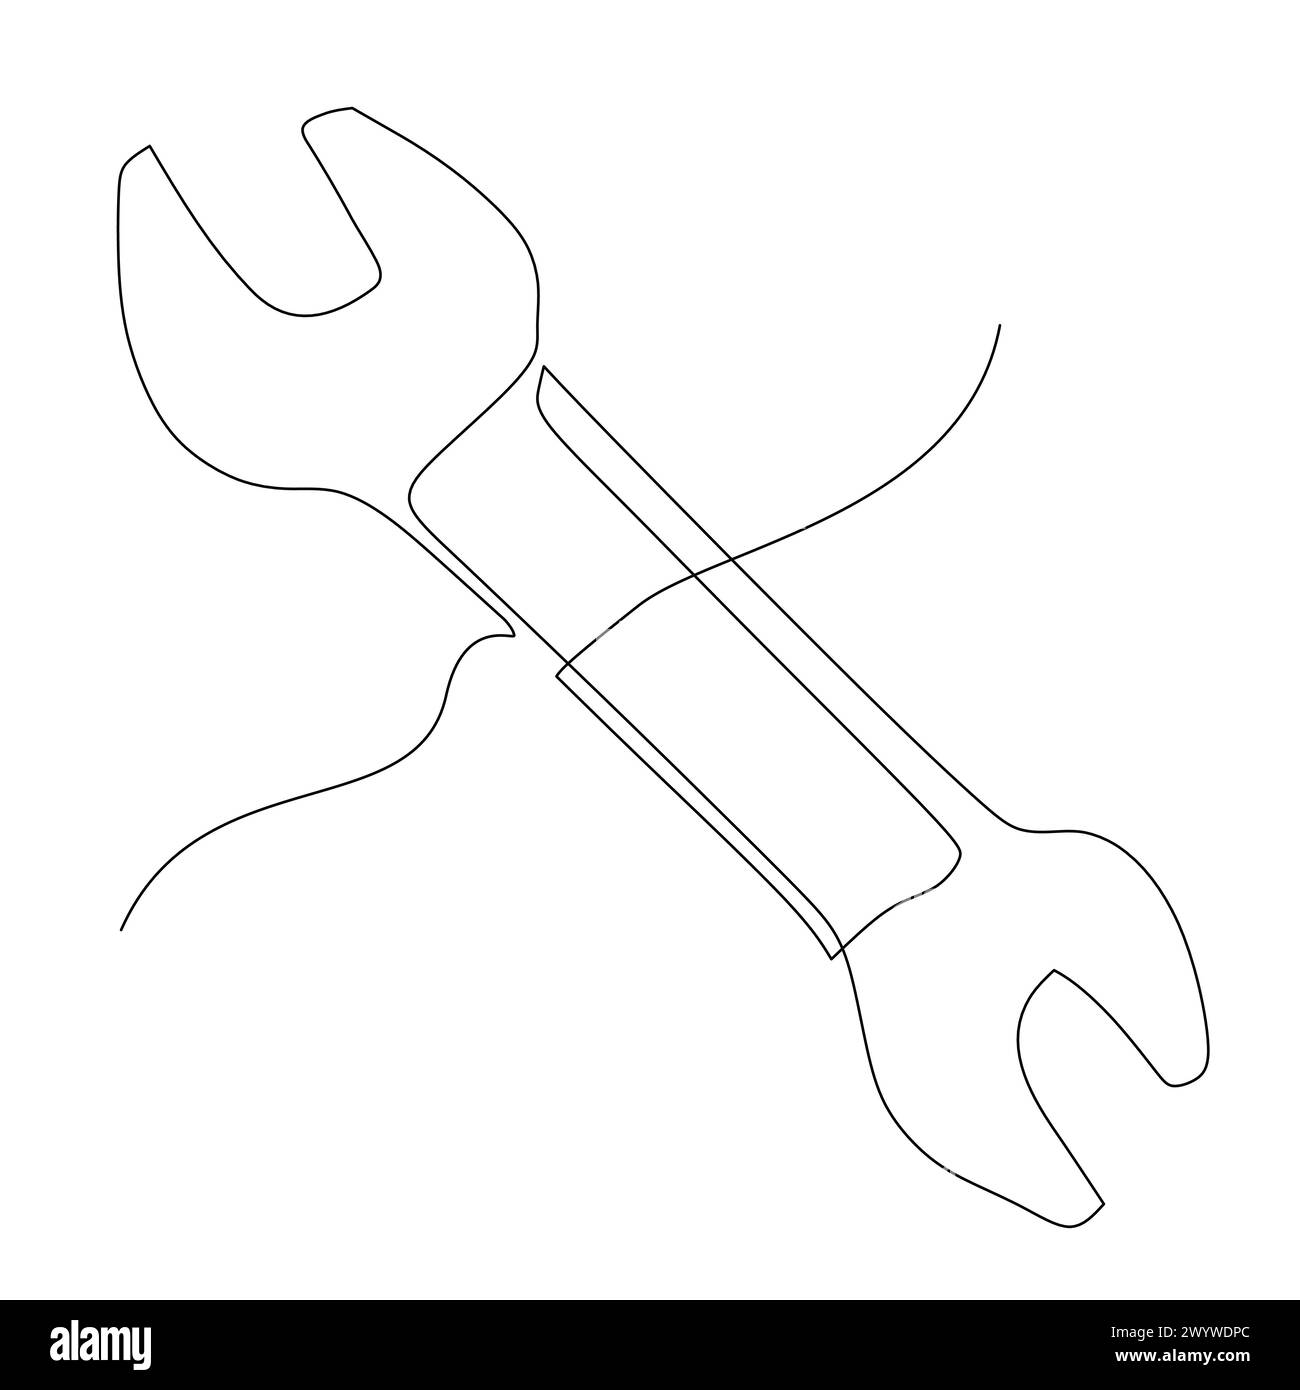 Continuous line drawing of a wrench. Tools for fastening or loosen nuts or bolt. Simple flat hand drawn style vector for tool in engineering and const Stock Vector